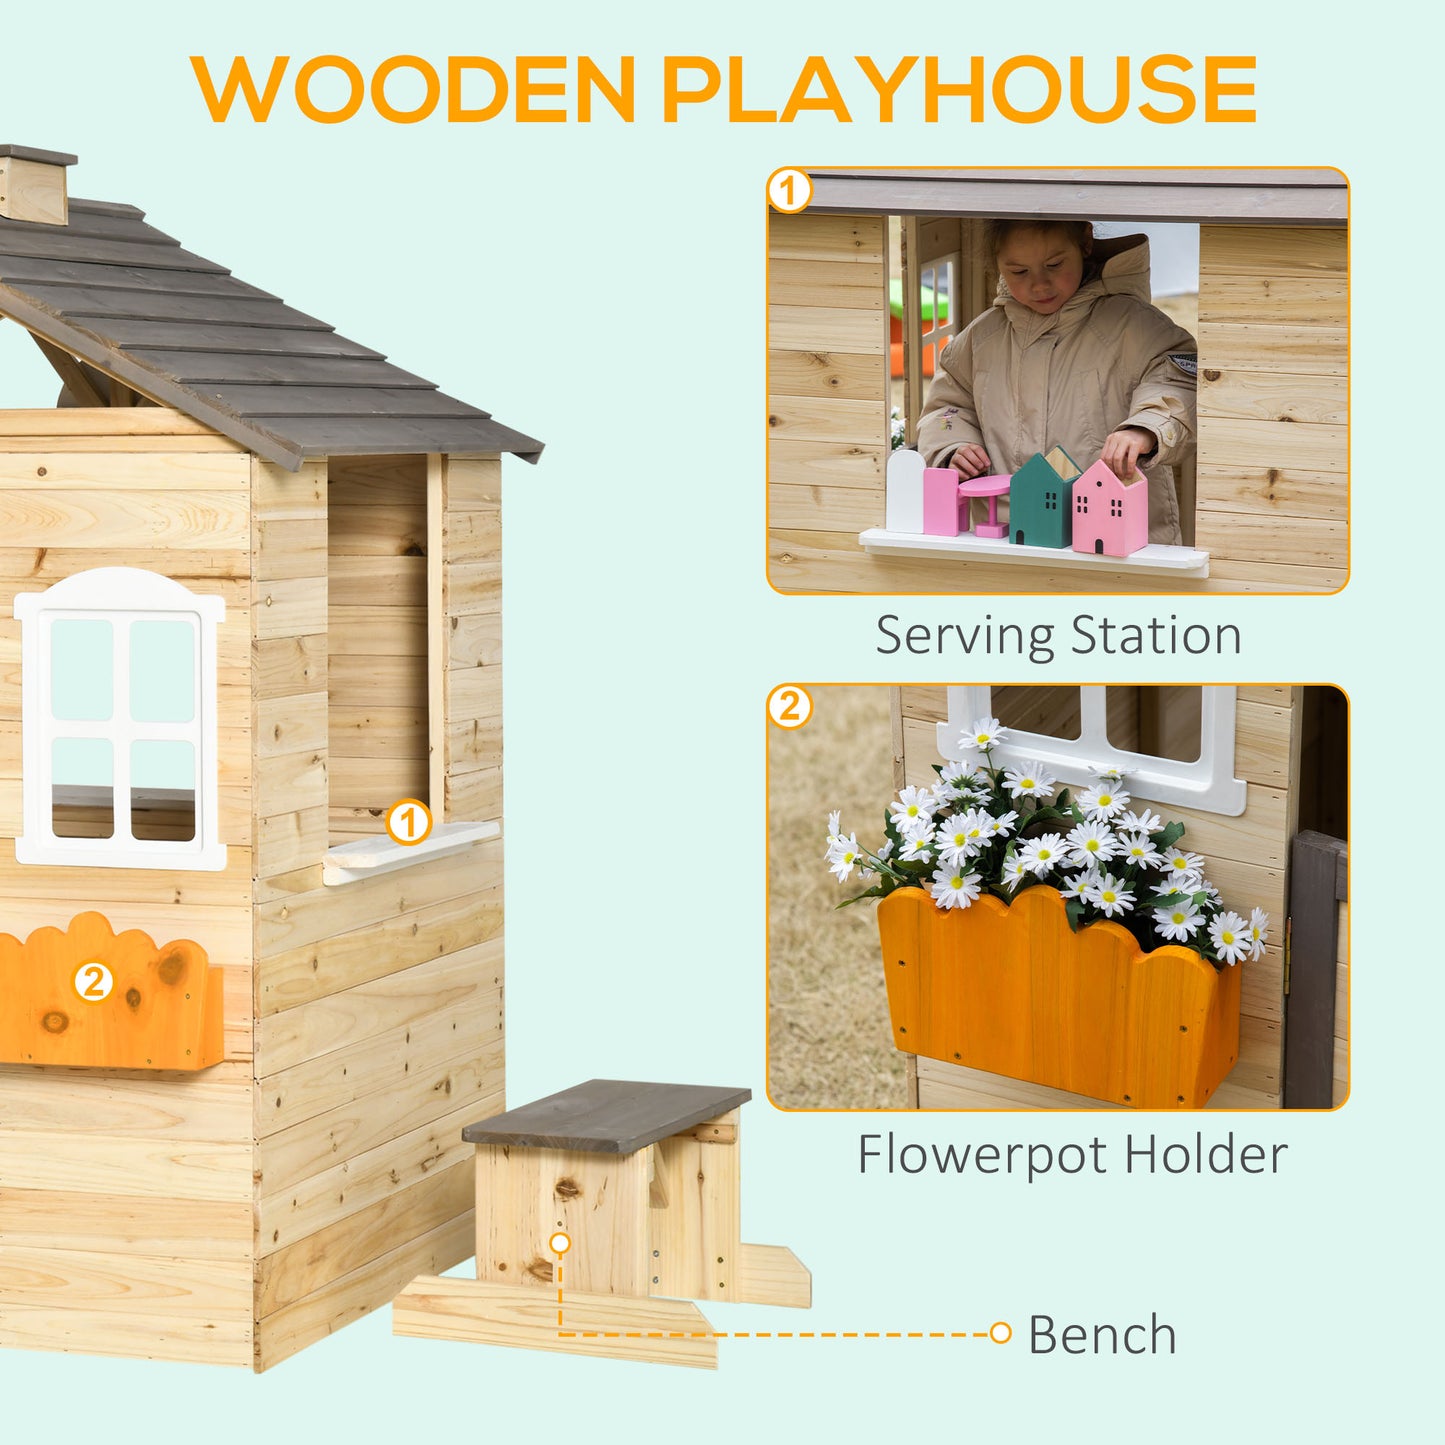 Outsunny Wooden Kids Playhouse, Outdoor Garden Games Cottage with Working Door, Windows, Bench, Service Station, Flowers Pot Holder for 3-7 Years Old